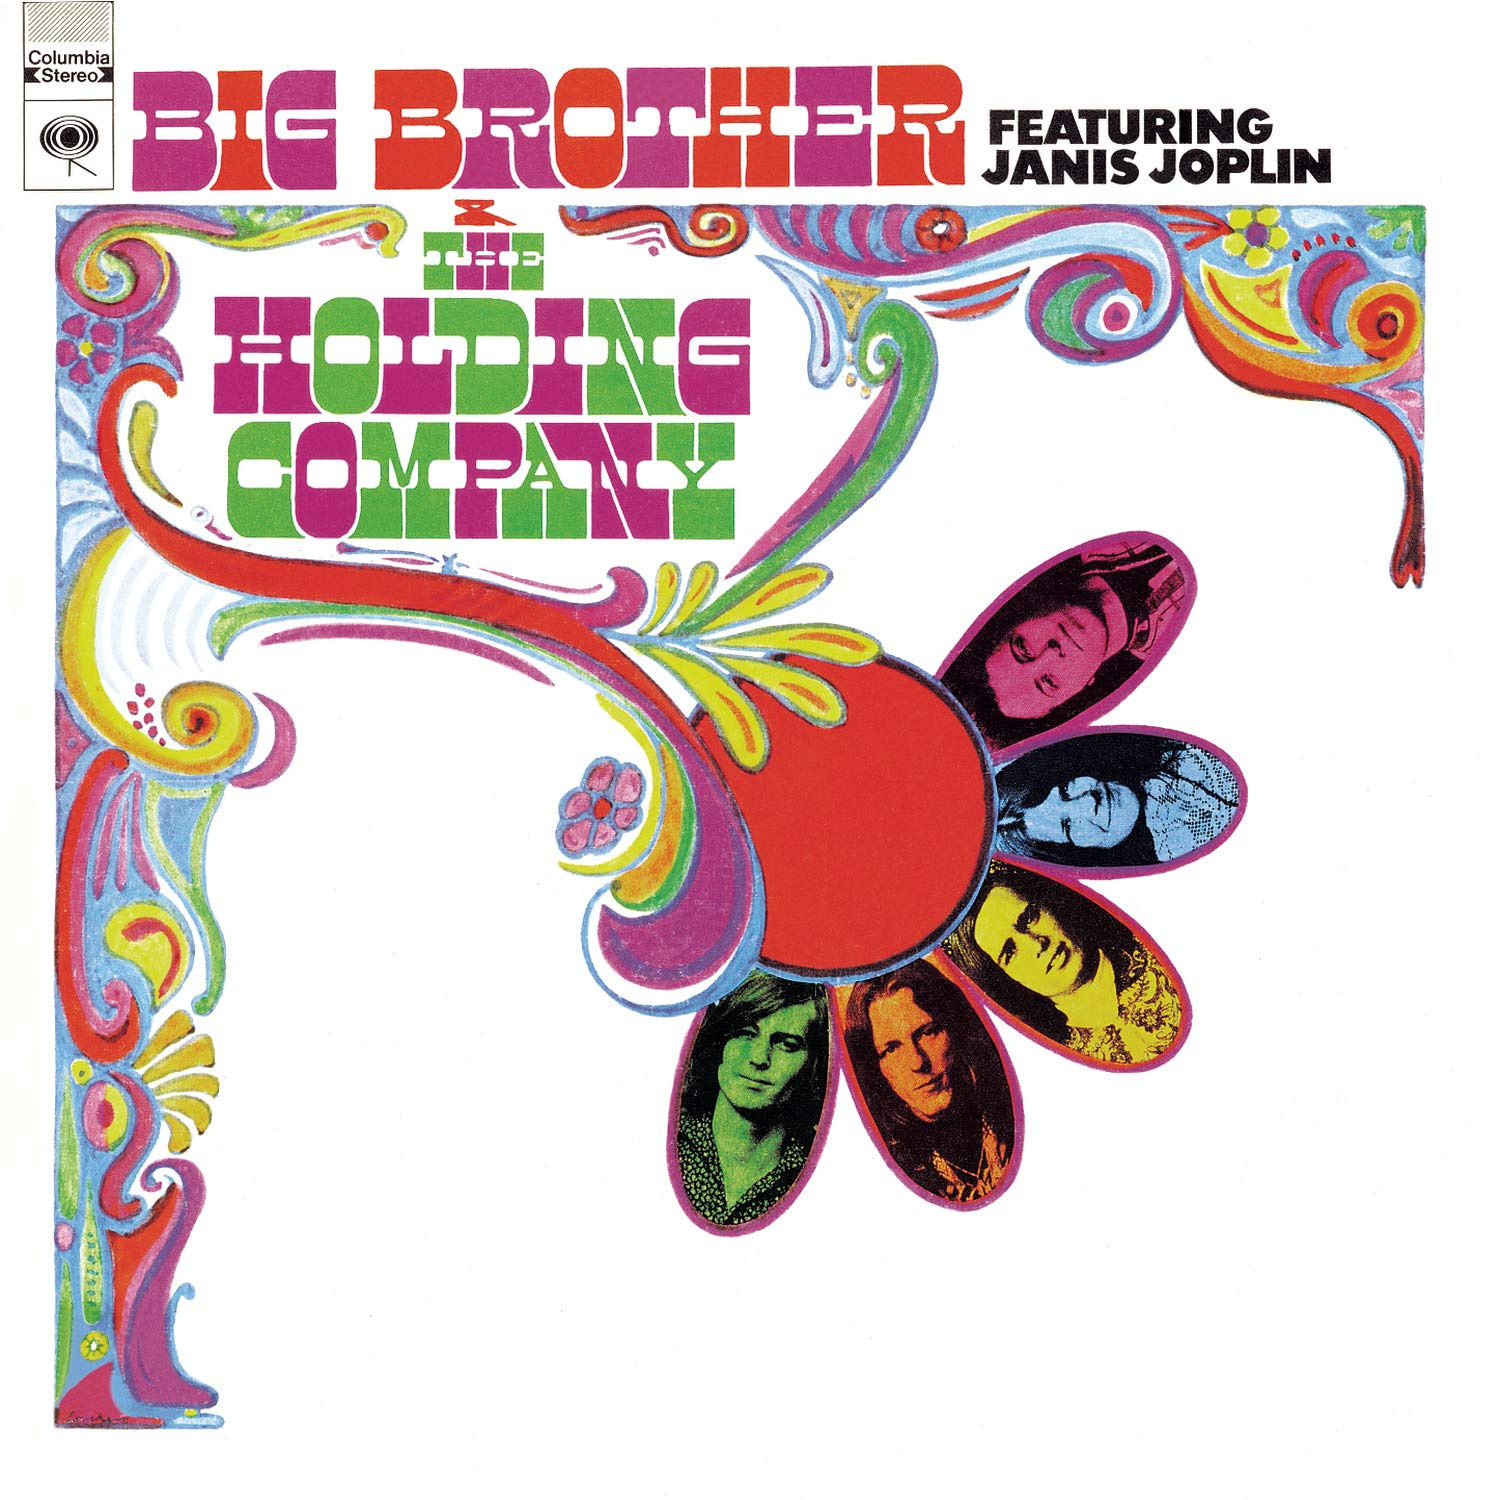 Big Brother & the holding company featuring Janis Joplin